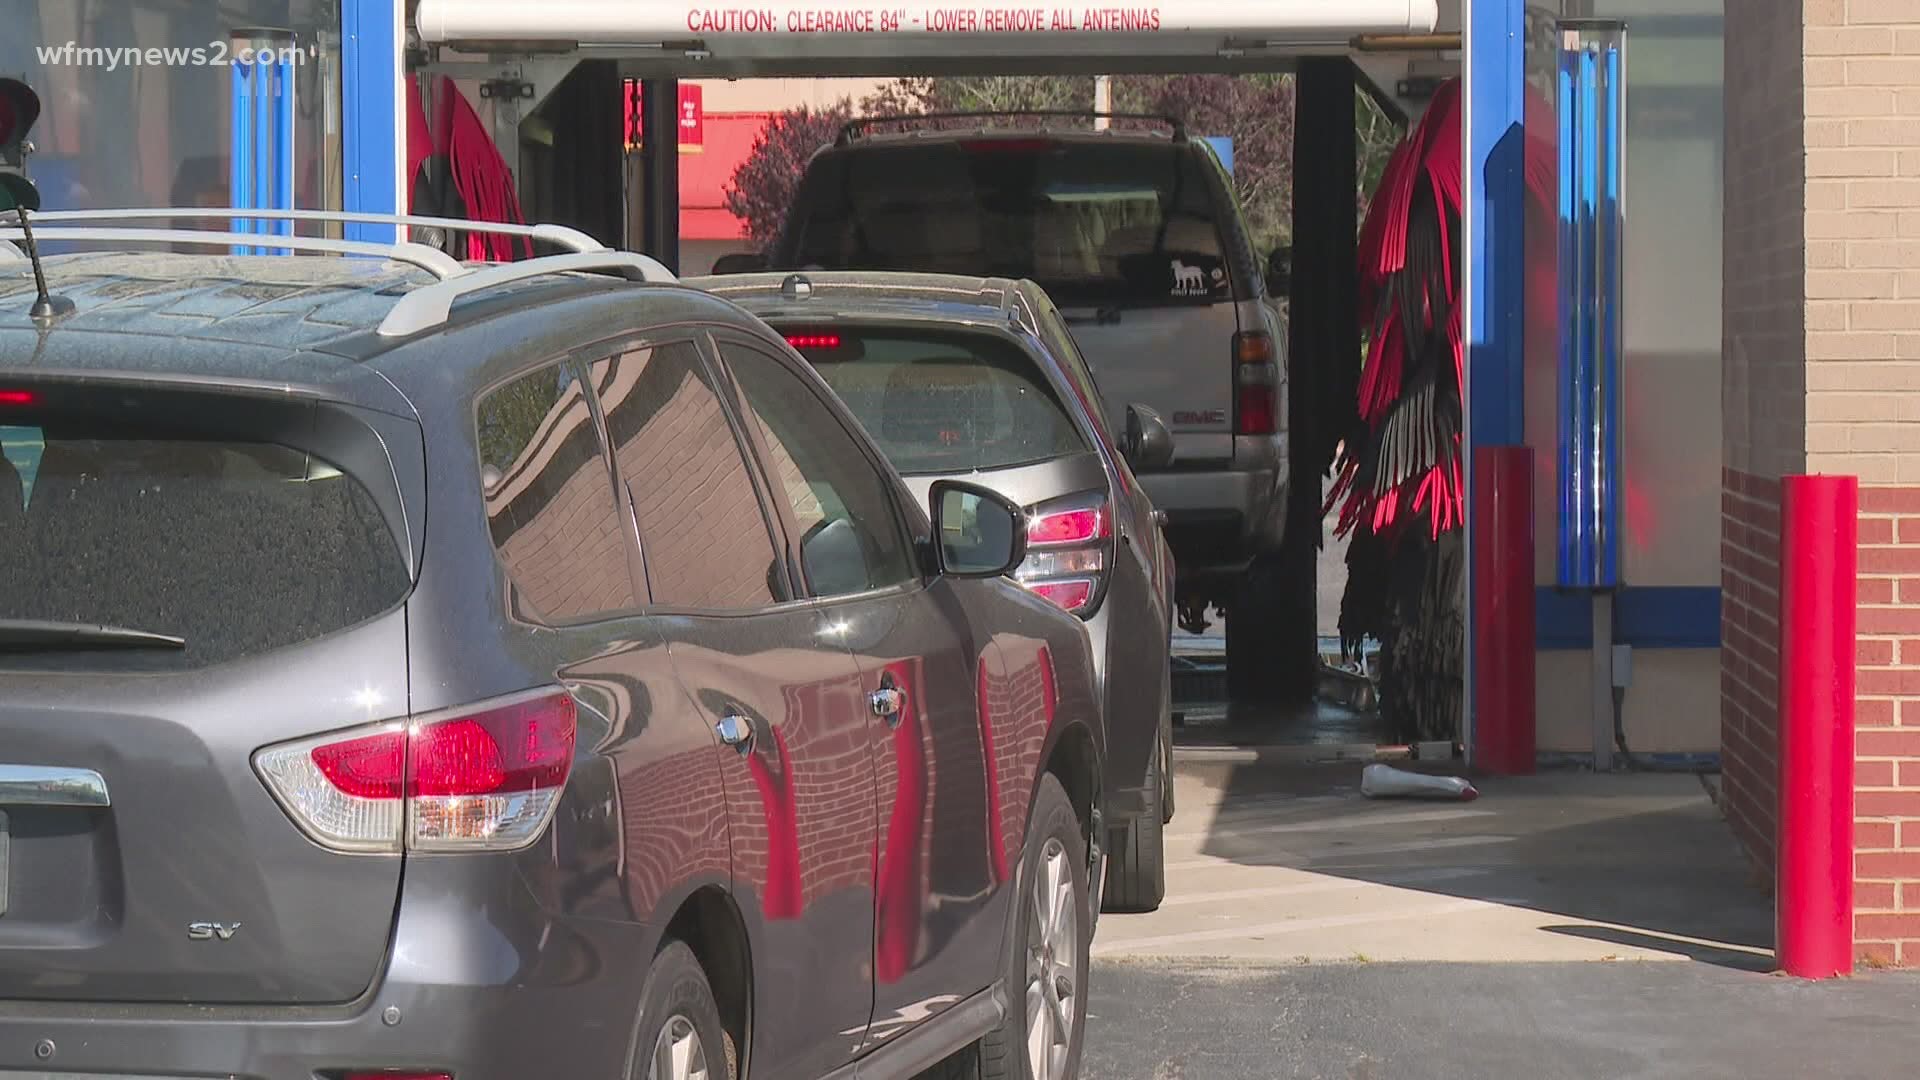 Jo Ann Gough said something went wrong when she pulled into the car wash. The damage cost hundreds of dollars.